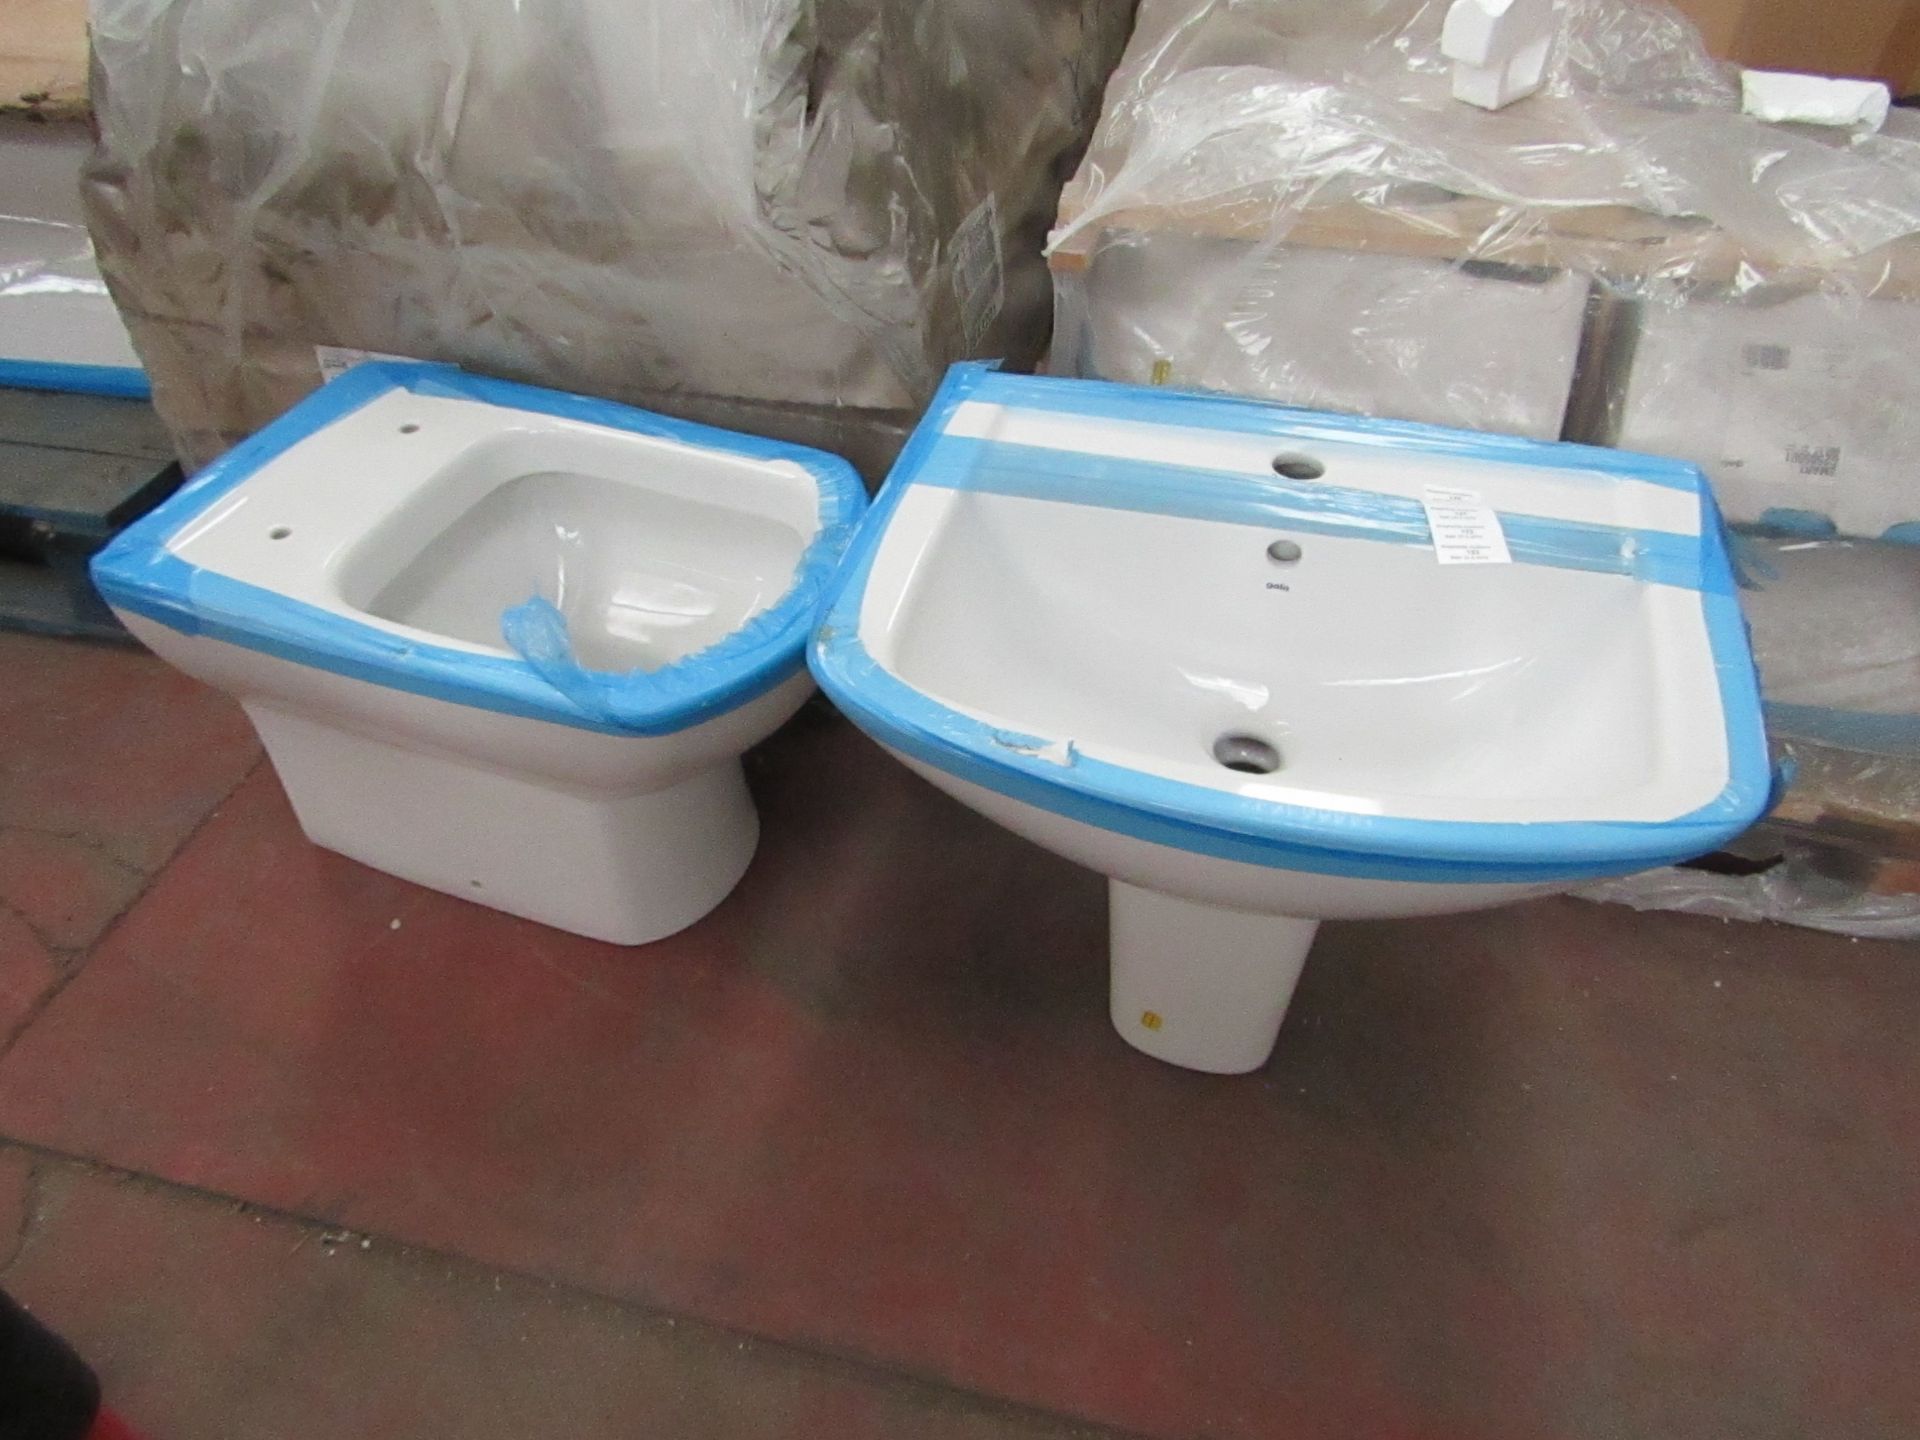 Gala Smart Bathroom set that includes a floor mounted back to wall toilet, a wall mounted sink